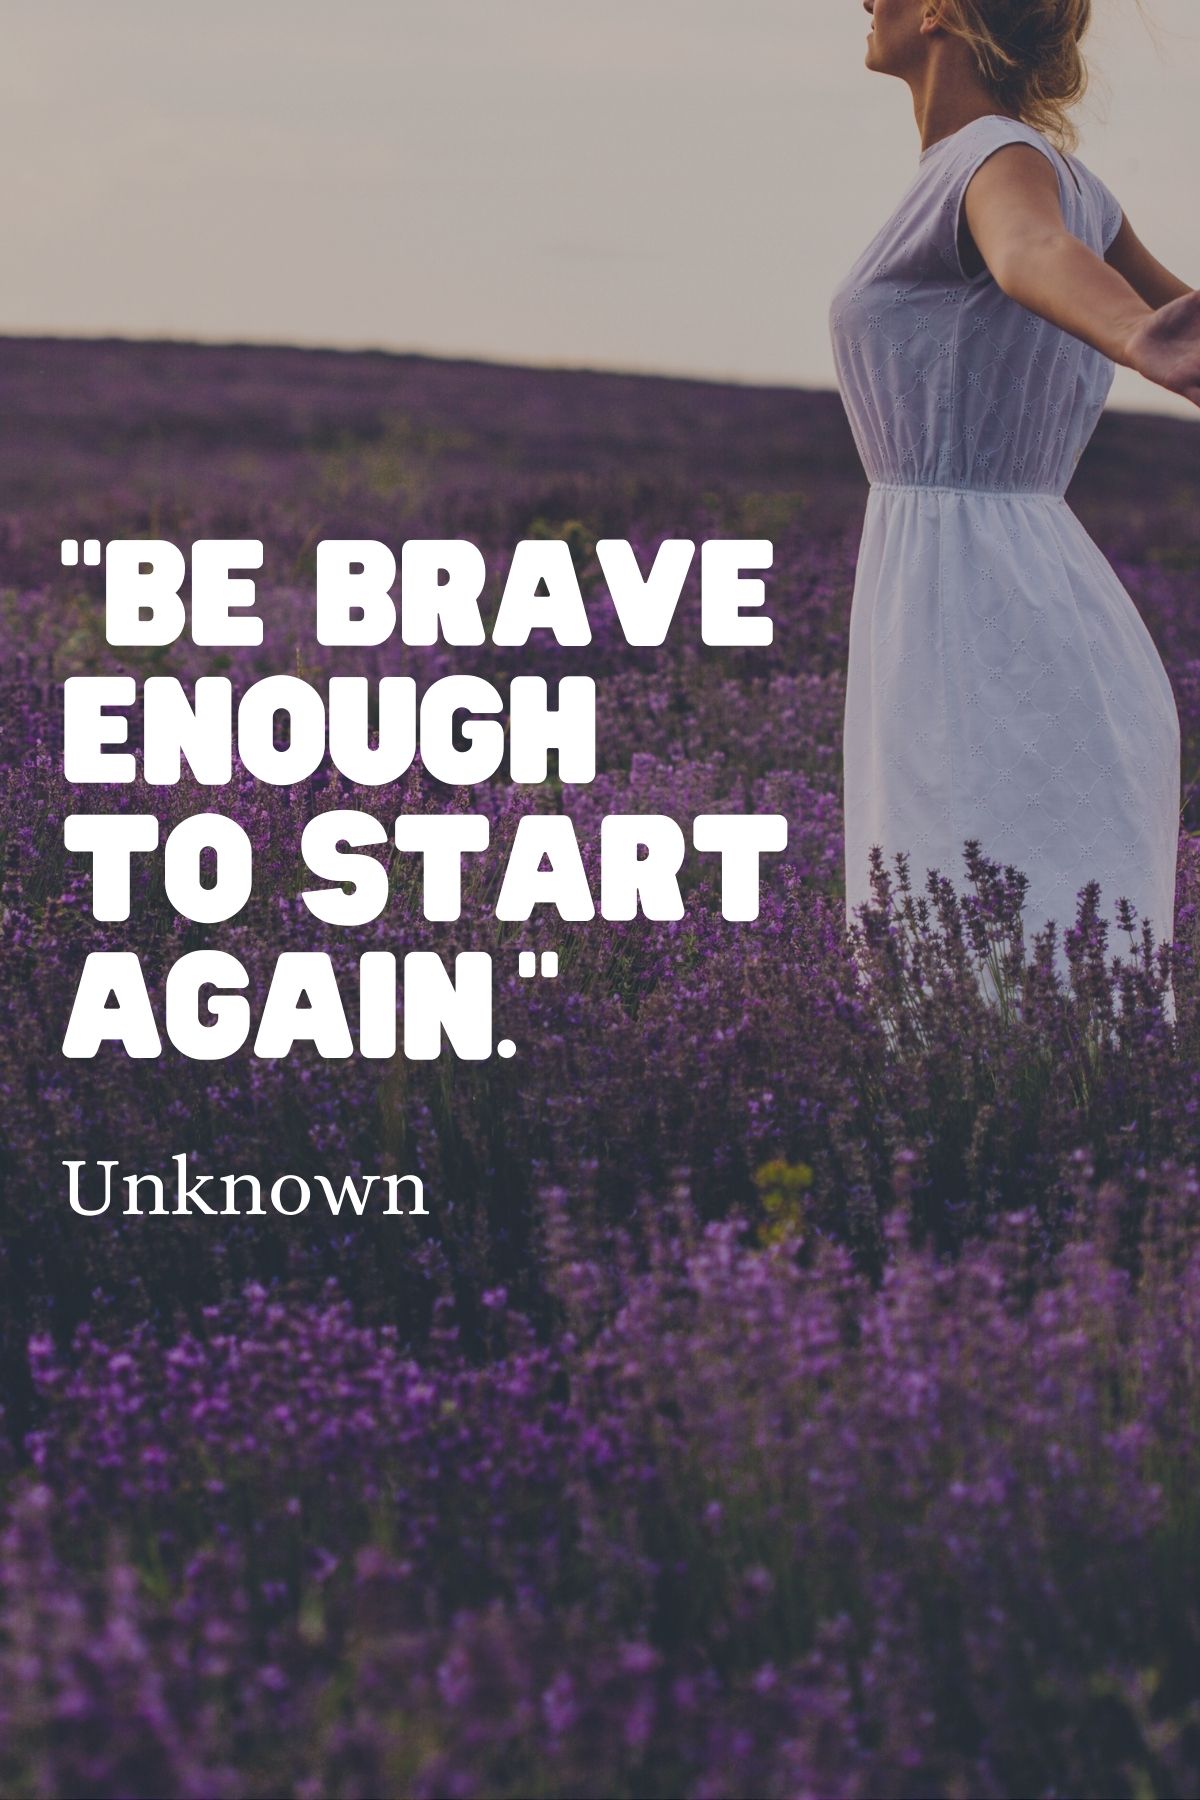 “Be brave enough to start again.” – Unknown fresh start quote